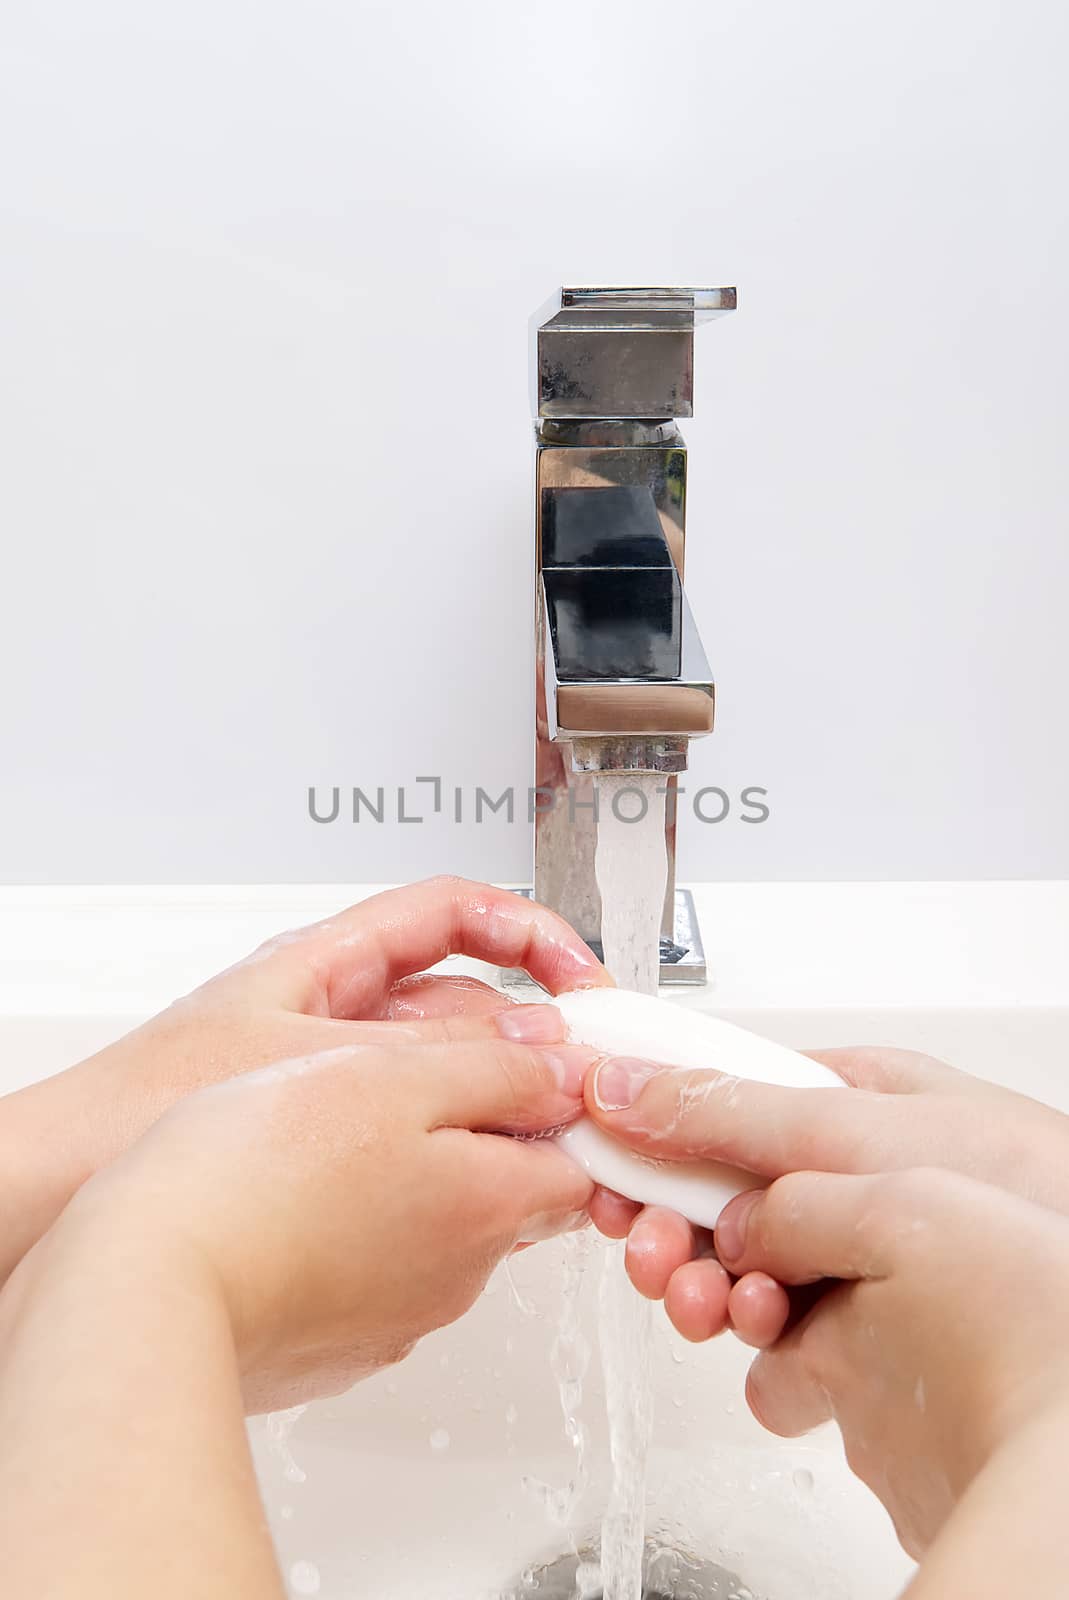 Childrens washing hands with soap under the crane with water. close-up. personal hygiene concept by PhotoTime